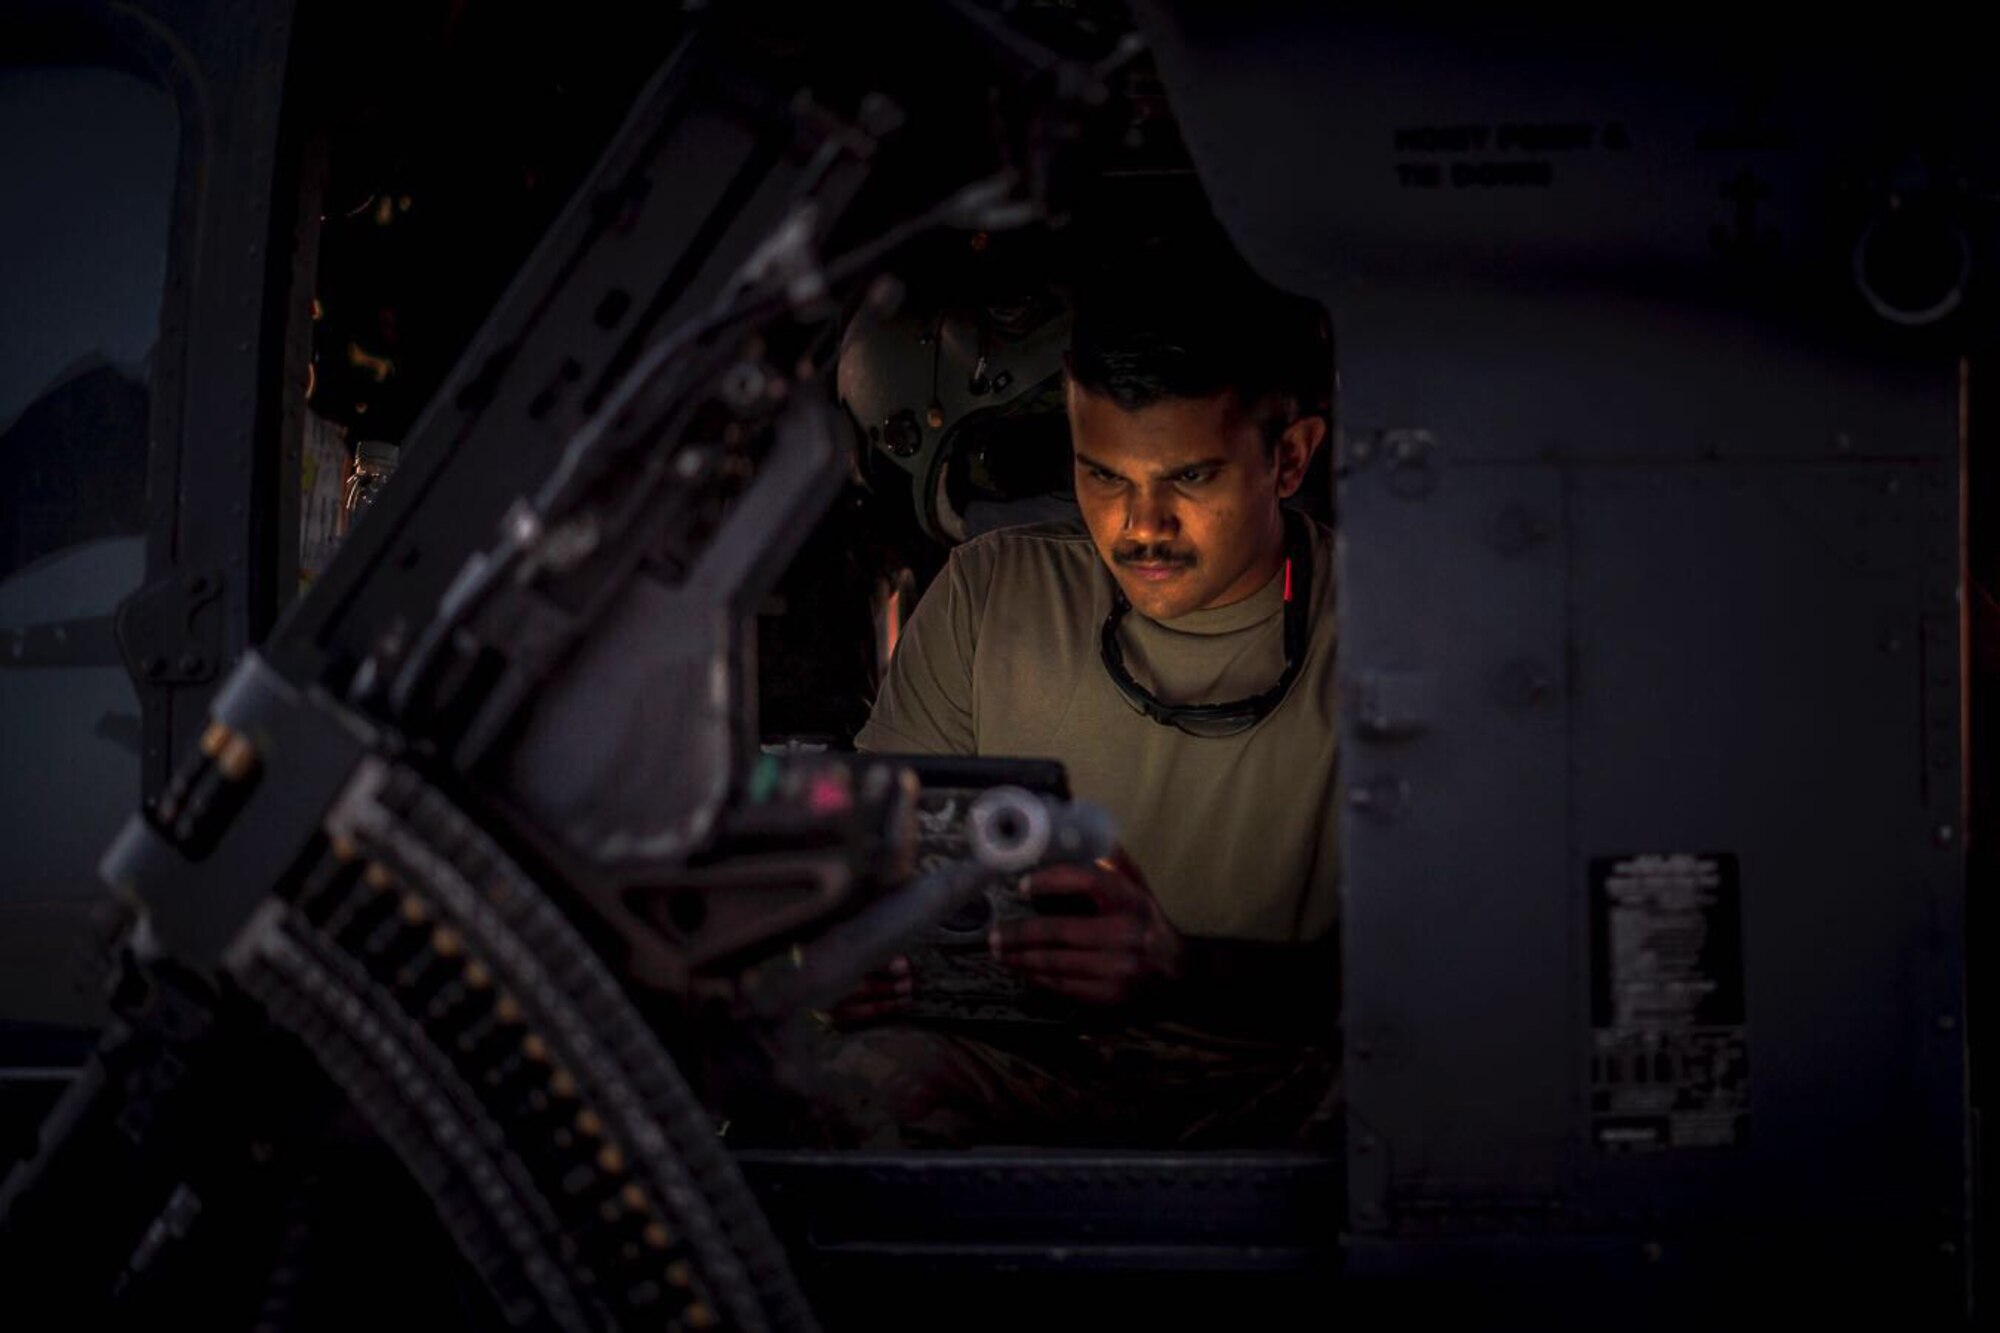 An Airman works on a helicopter